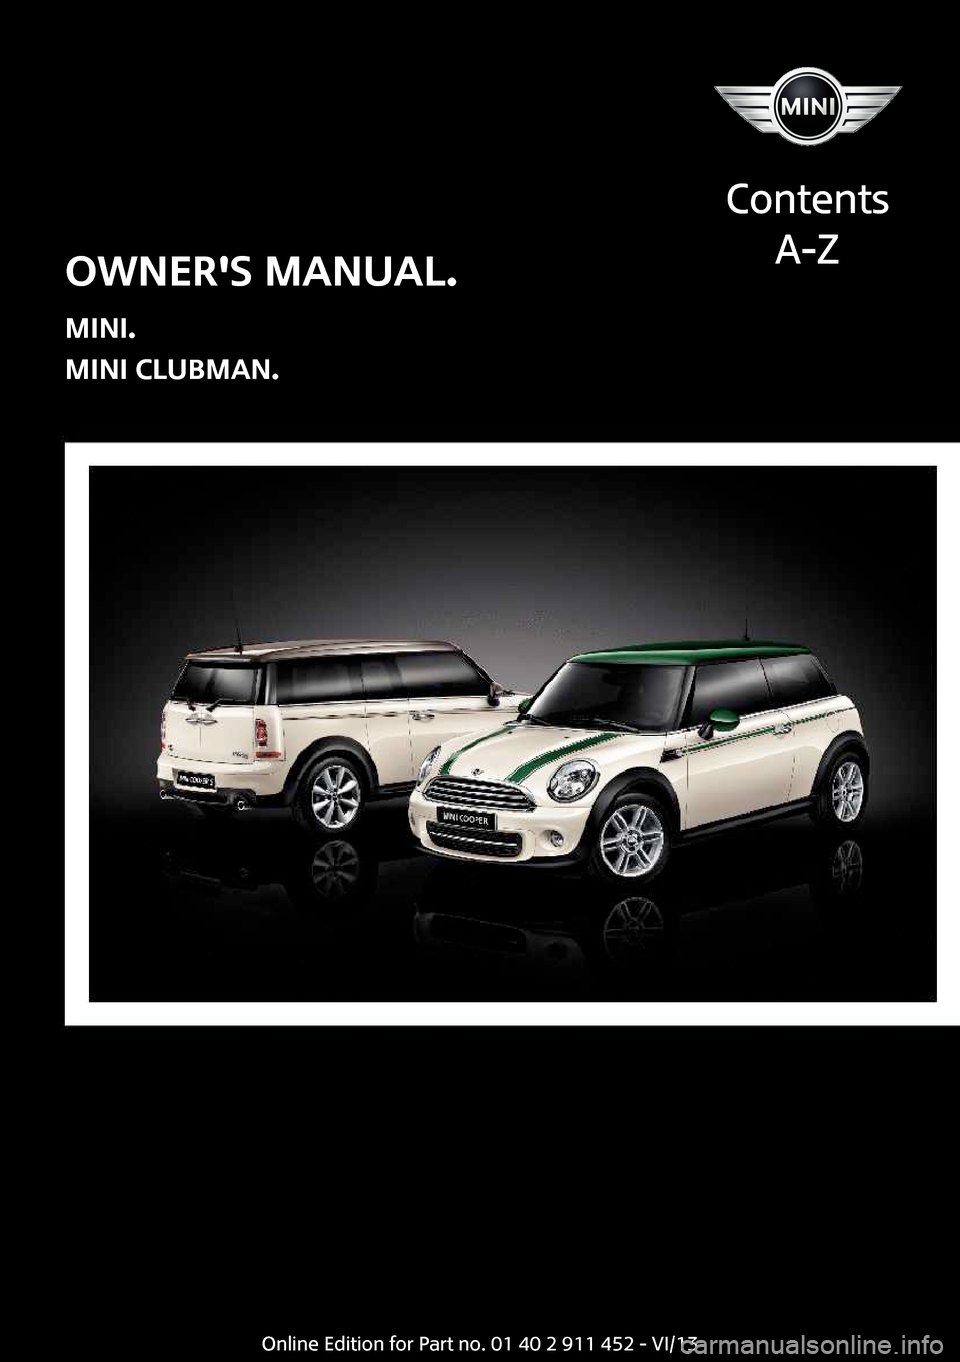 MINI Clubman 2014  Owners Manual (Mini Connected) Owners Manual.
MINI.
MINI Clubman.
Contents
A-ZOnline Edition for Part no. 01 40 2 911 452 - VI/13  